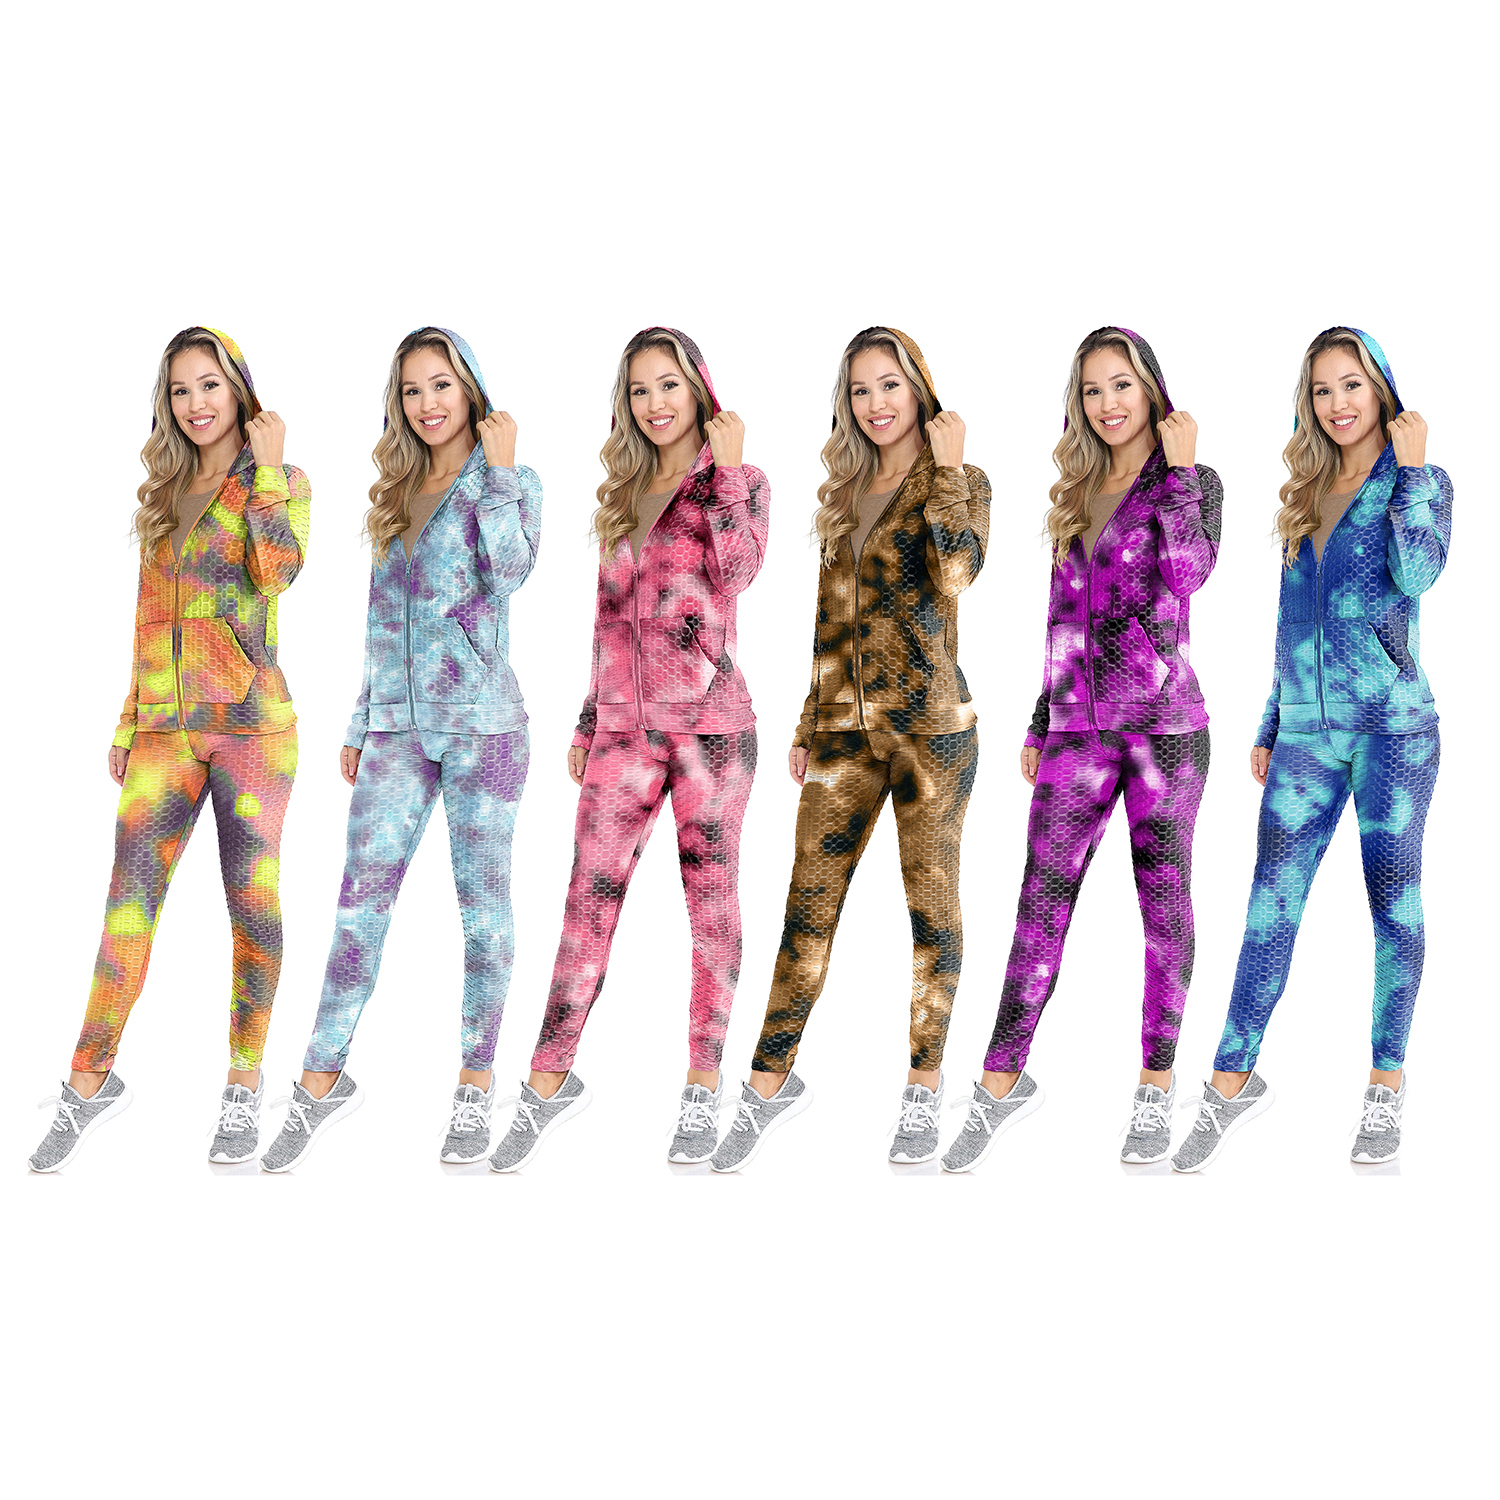 2-Piece Women's Textured Anti Cellulite Body Shaping Jogger Tracksuit With Hoodie - Large/X-Large